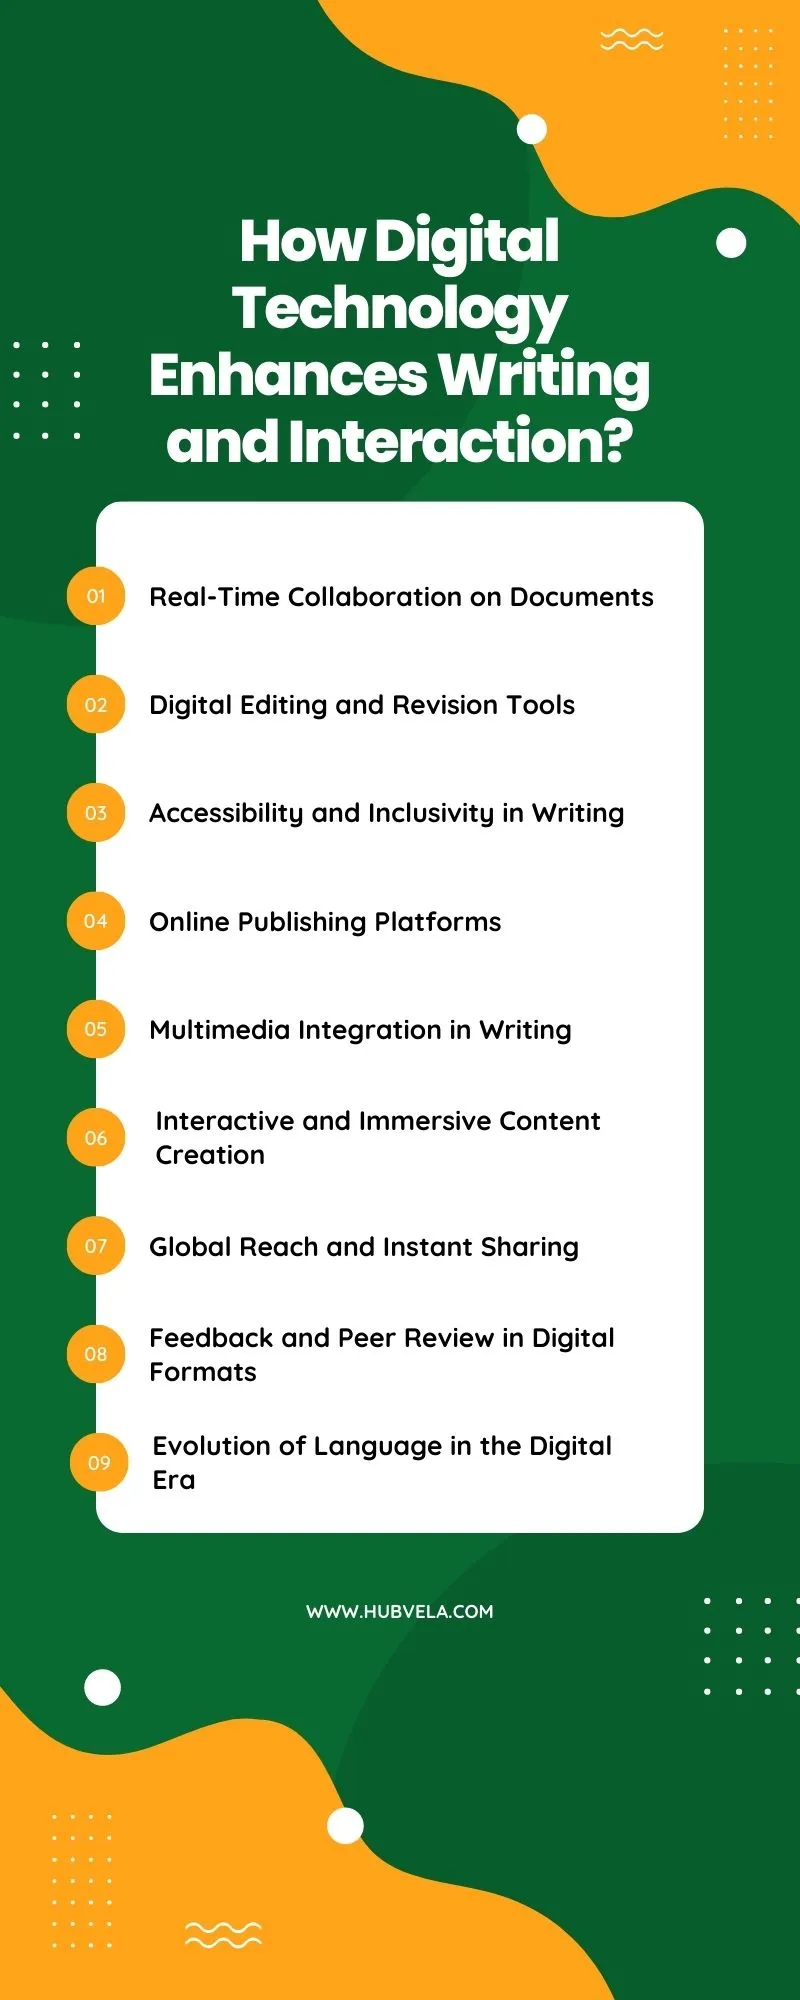 How Digital Technology Enhances Writing and Interaction Infographic